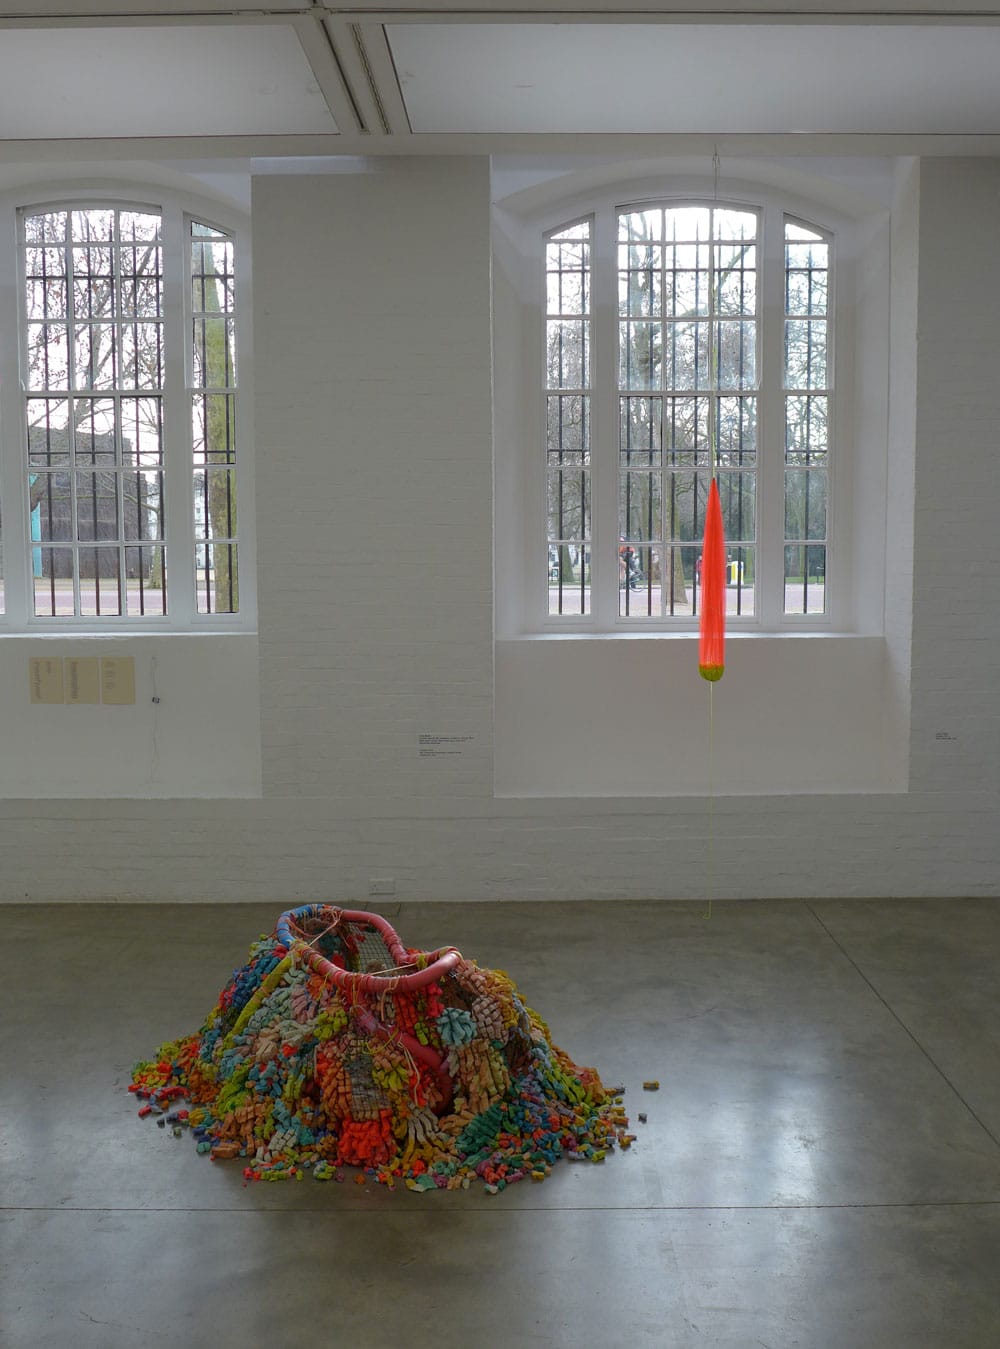 Emily Motto, Bloomberg New Contemporaries 2014 